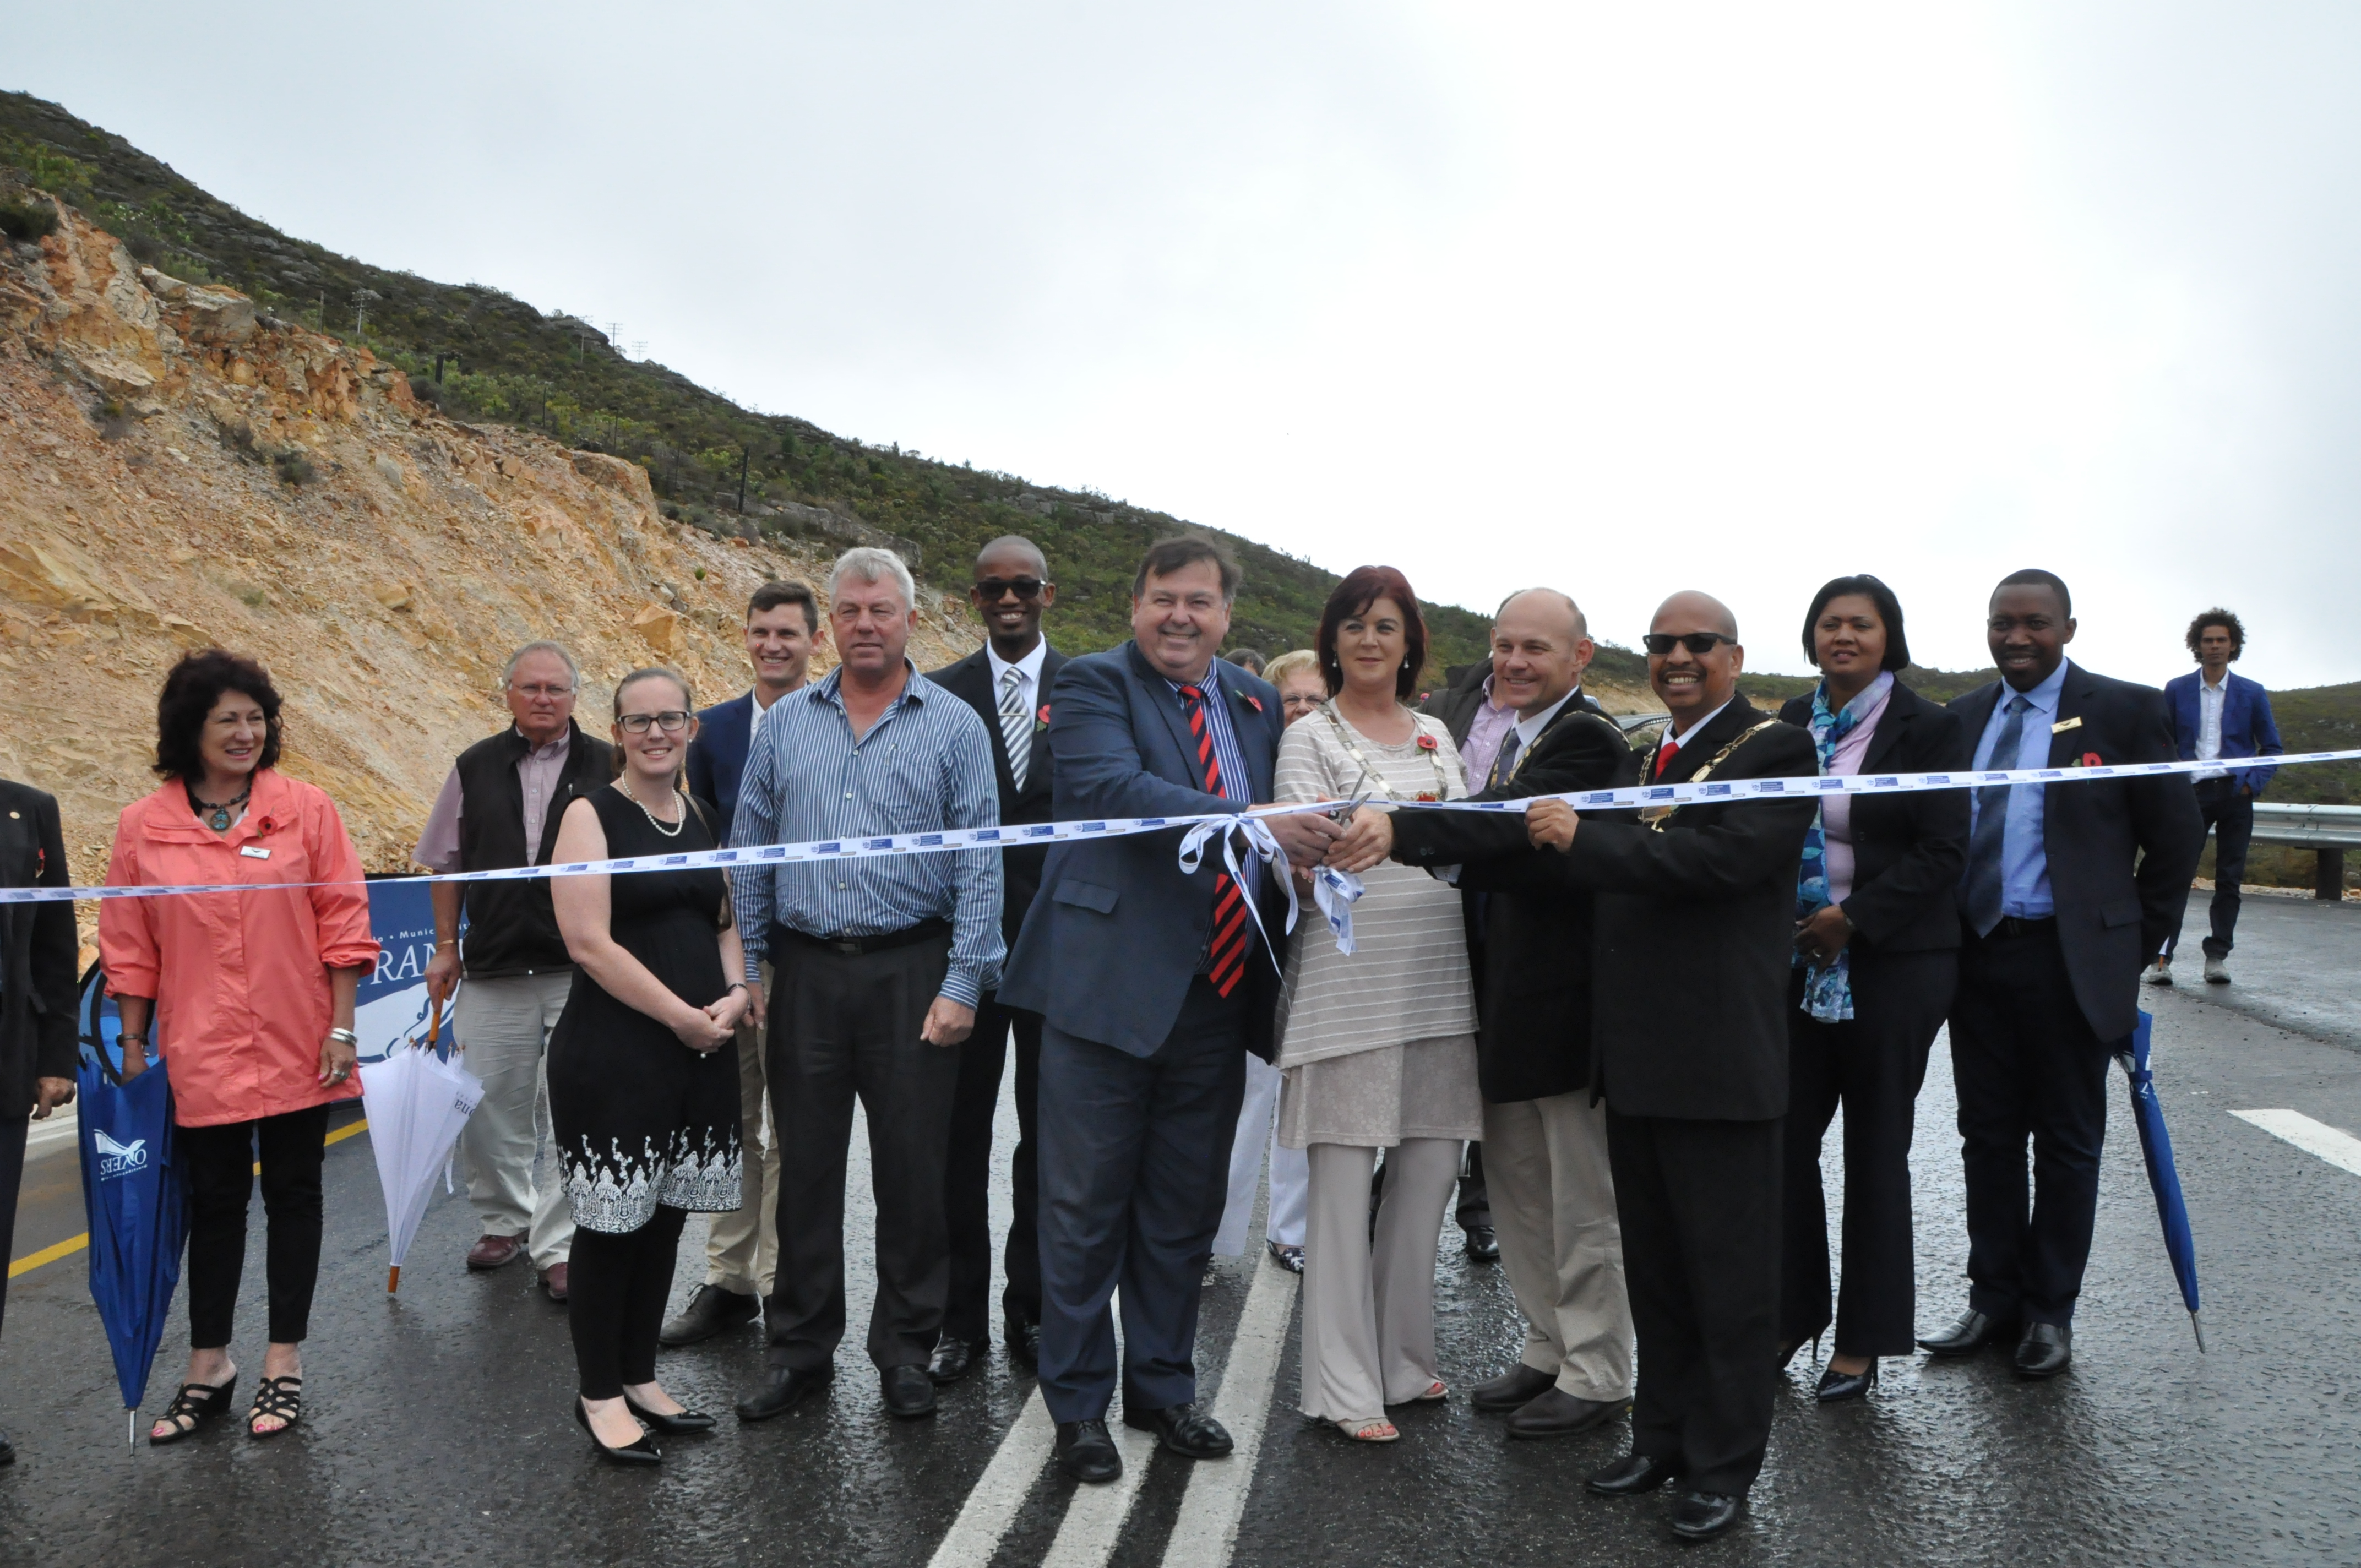 Minister Grant, Mayor Christelle Vosloo (Theewaterskloof Municipality), Mayor Andries Franklin (Overberg District Municipality), Mayor Rudolph Smith (Overstrand Municipality), and officials at the ribbon cutting ceremony.